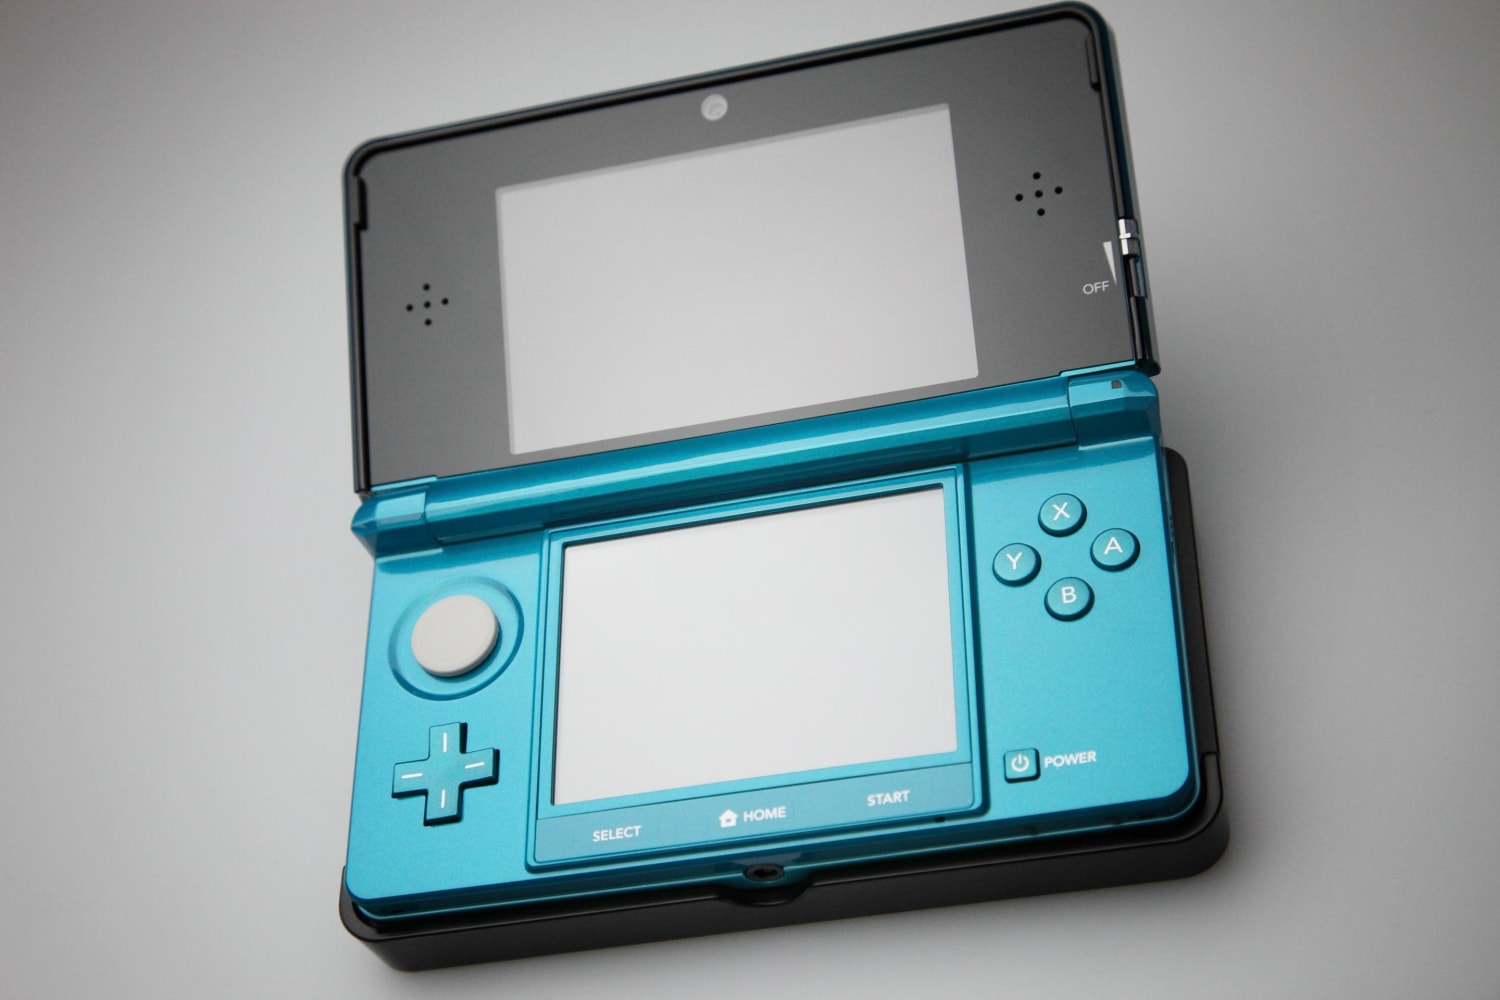 Fixed that for you: 10 ways to boost the Nintendo 3DS